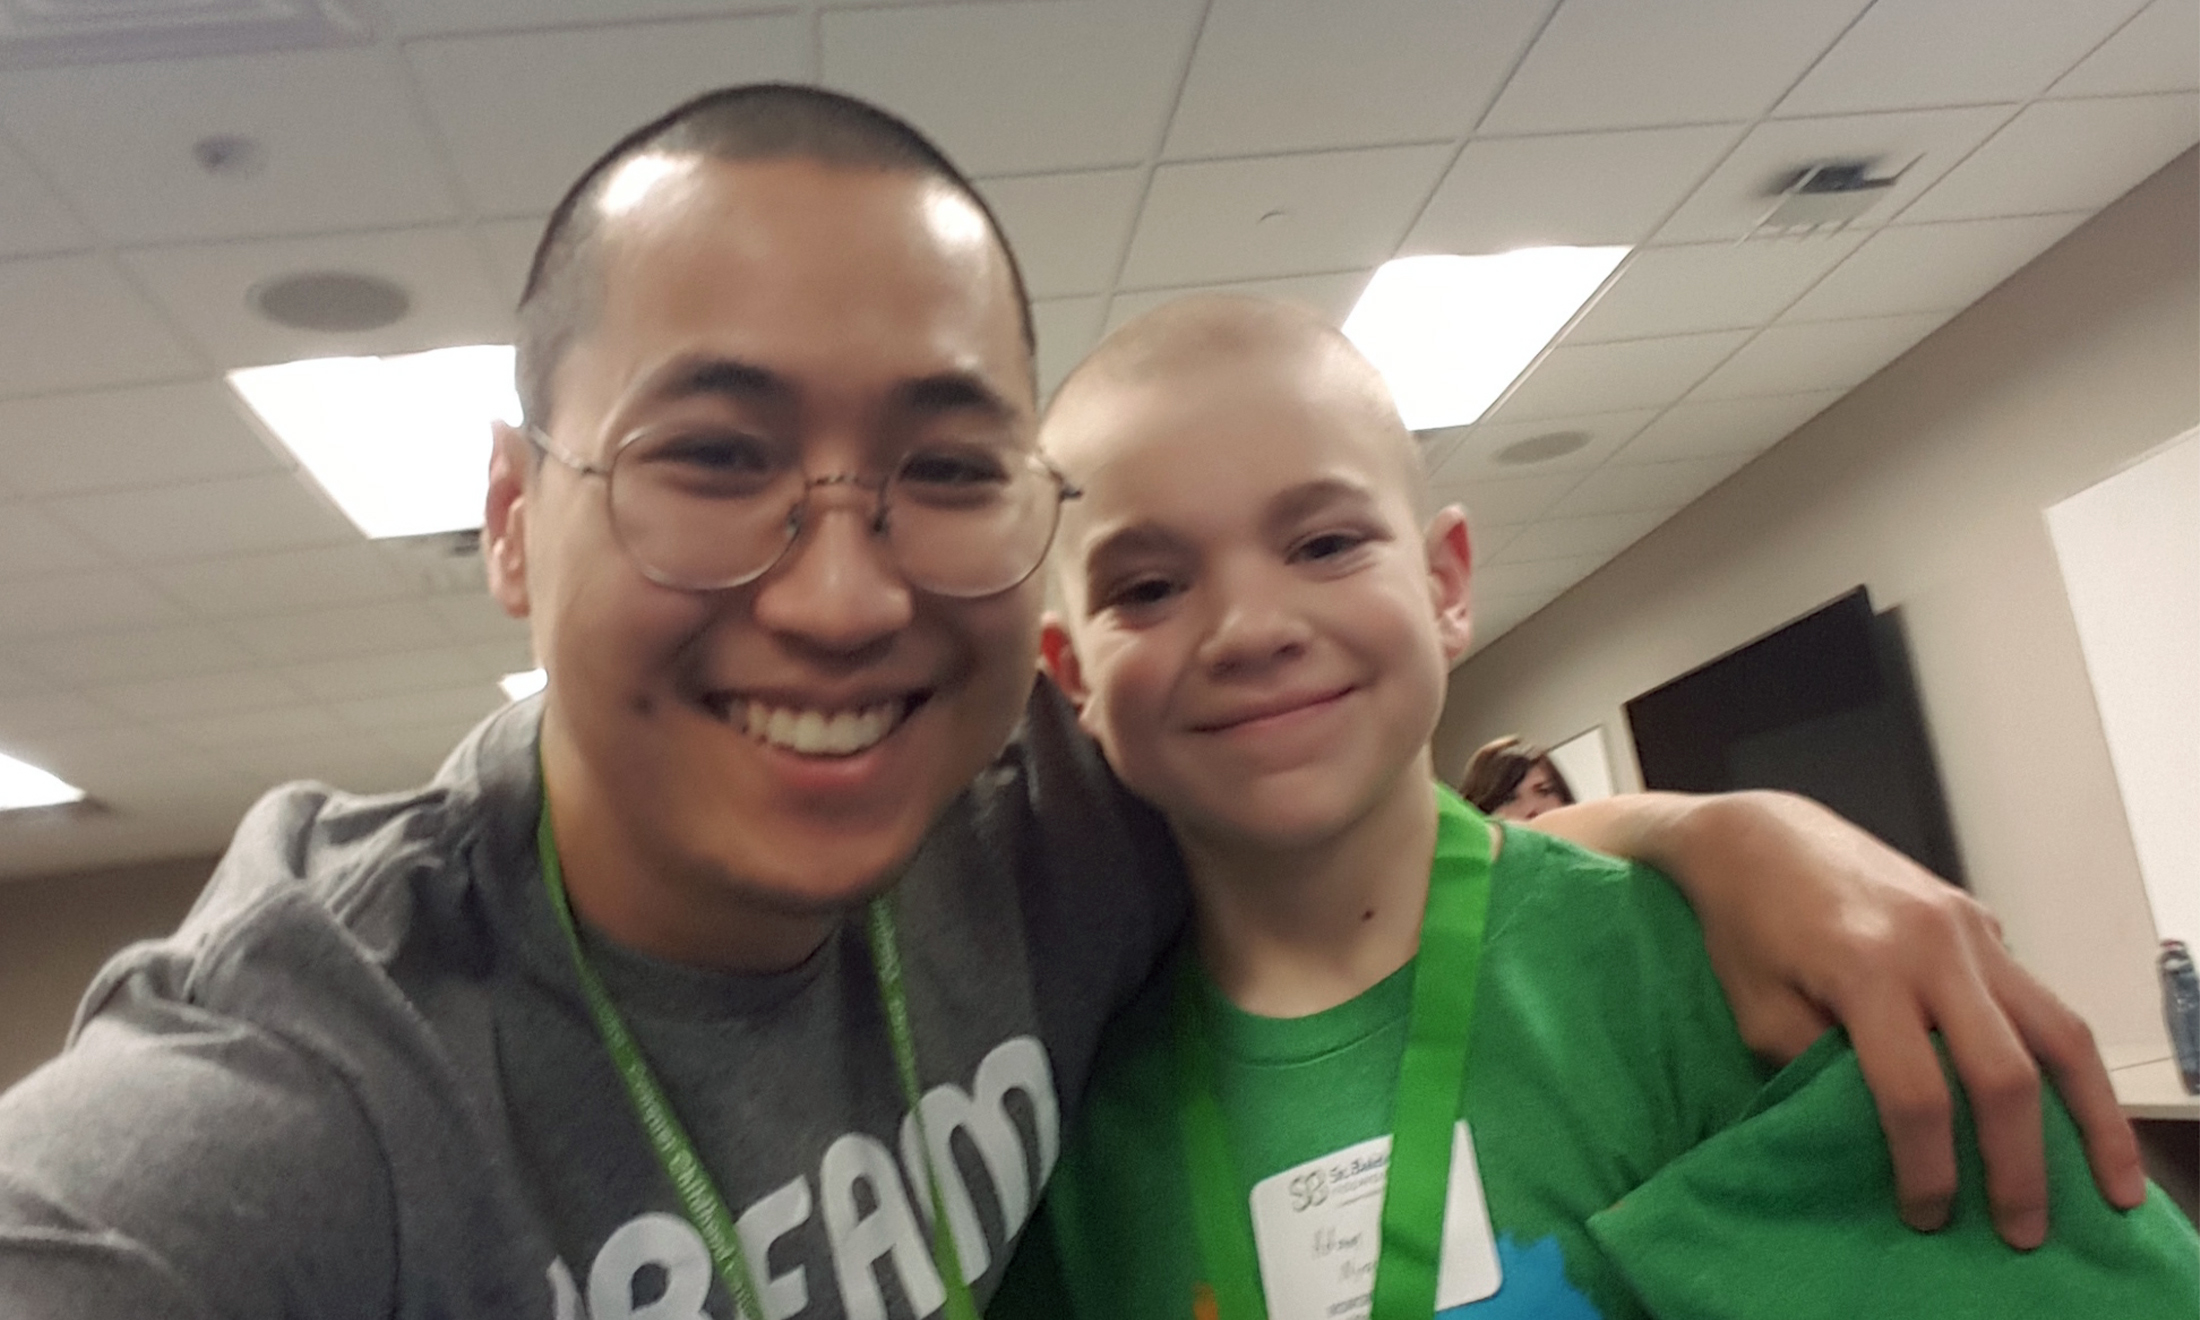 An image of an OUWB student at the St. Baldrick's Fundraiser